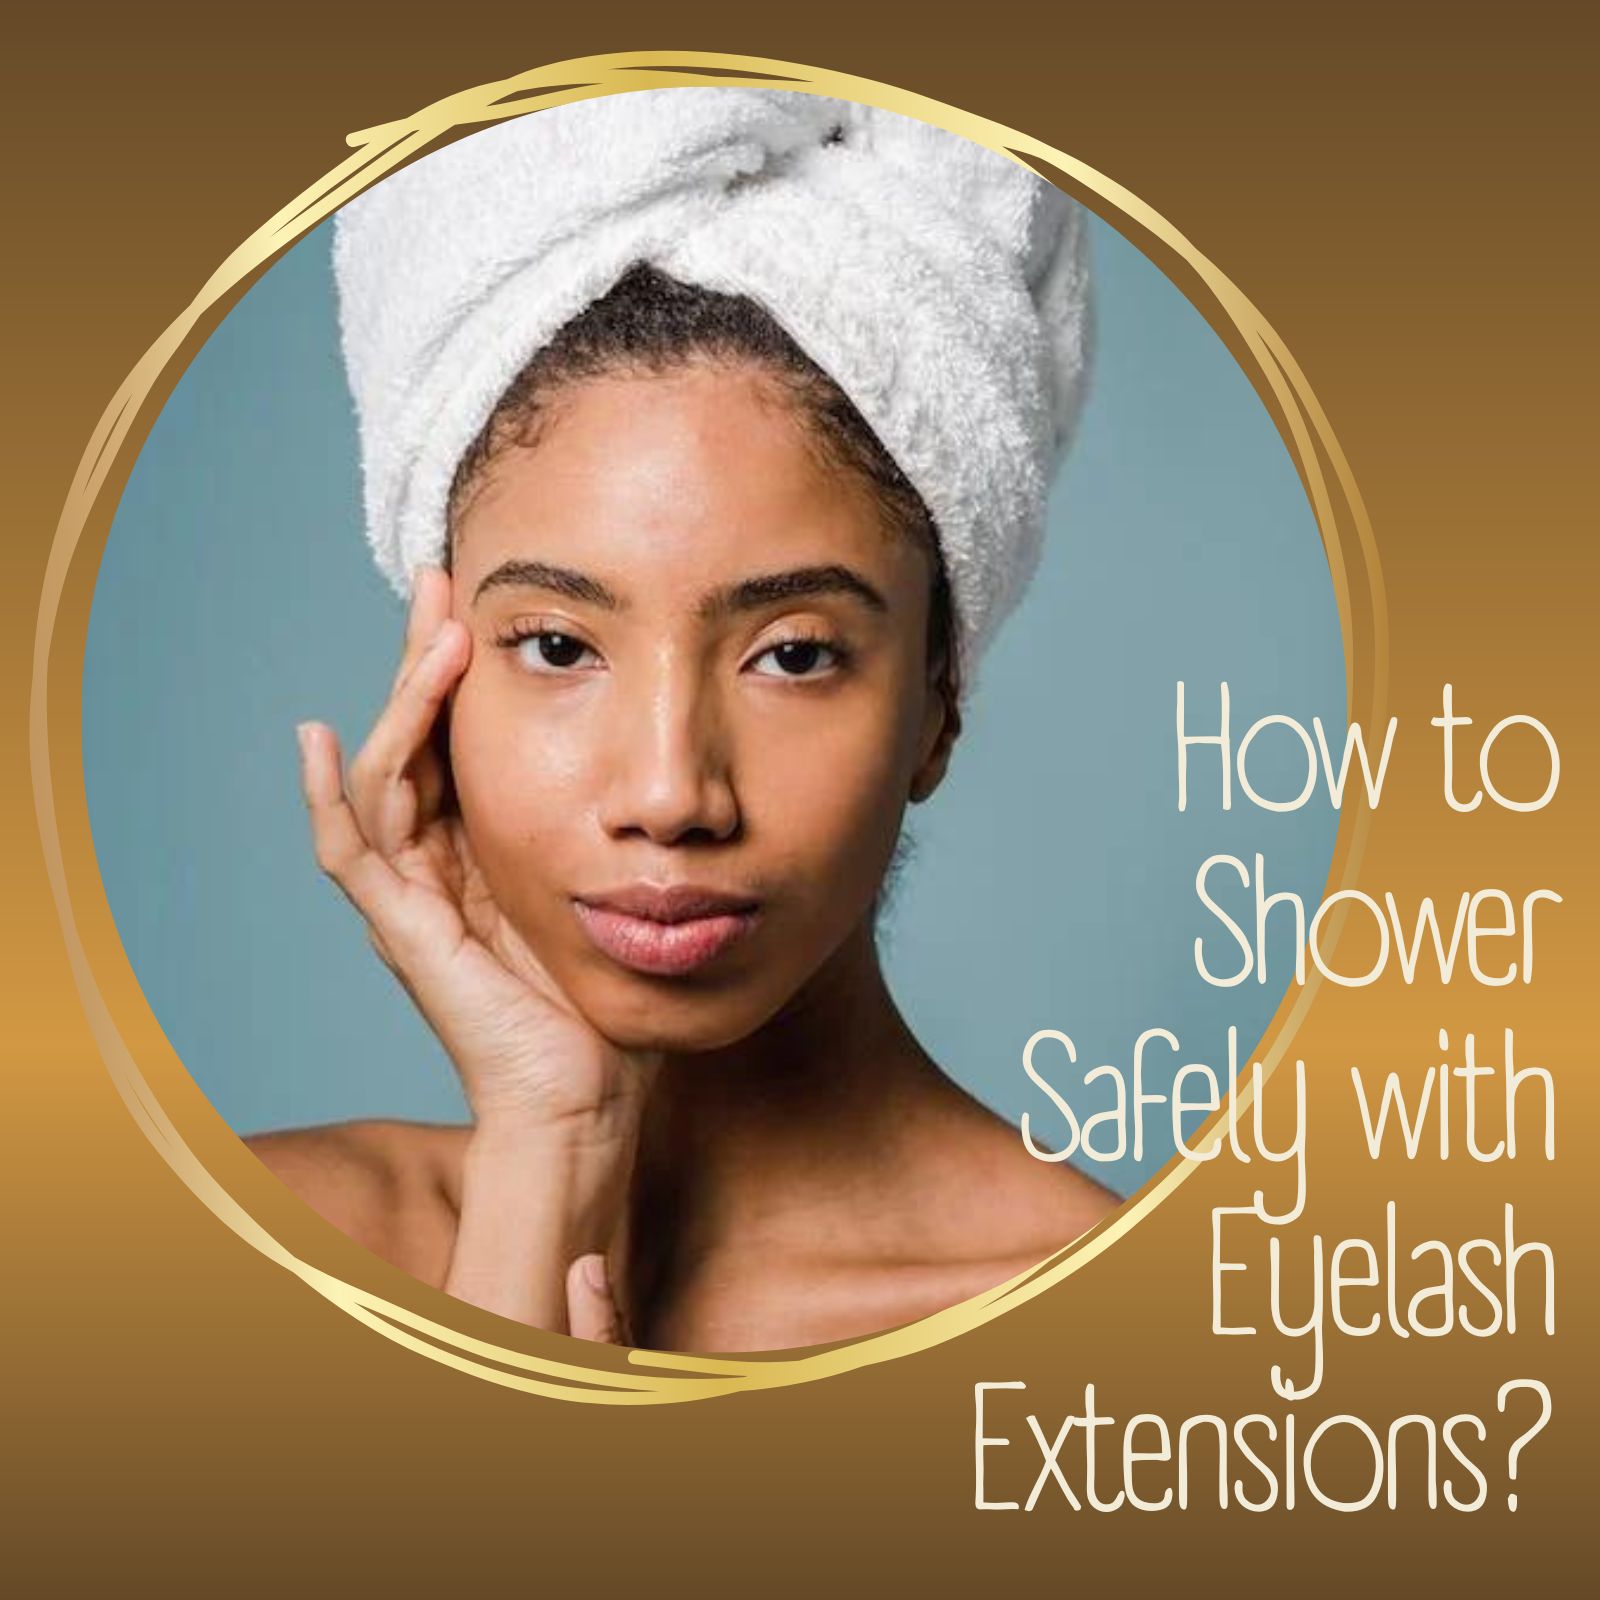 How to Shower Safely with Eyelash Extensions?